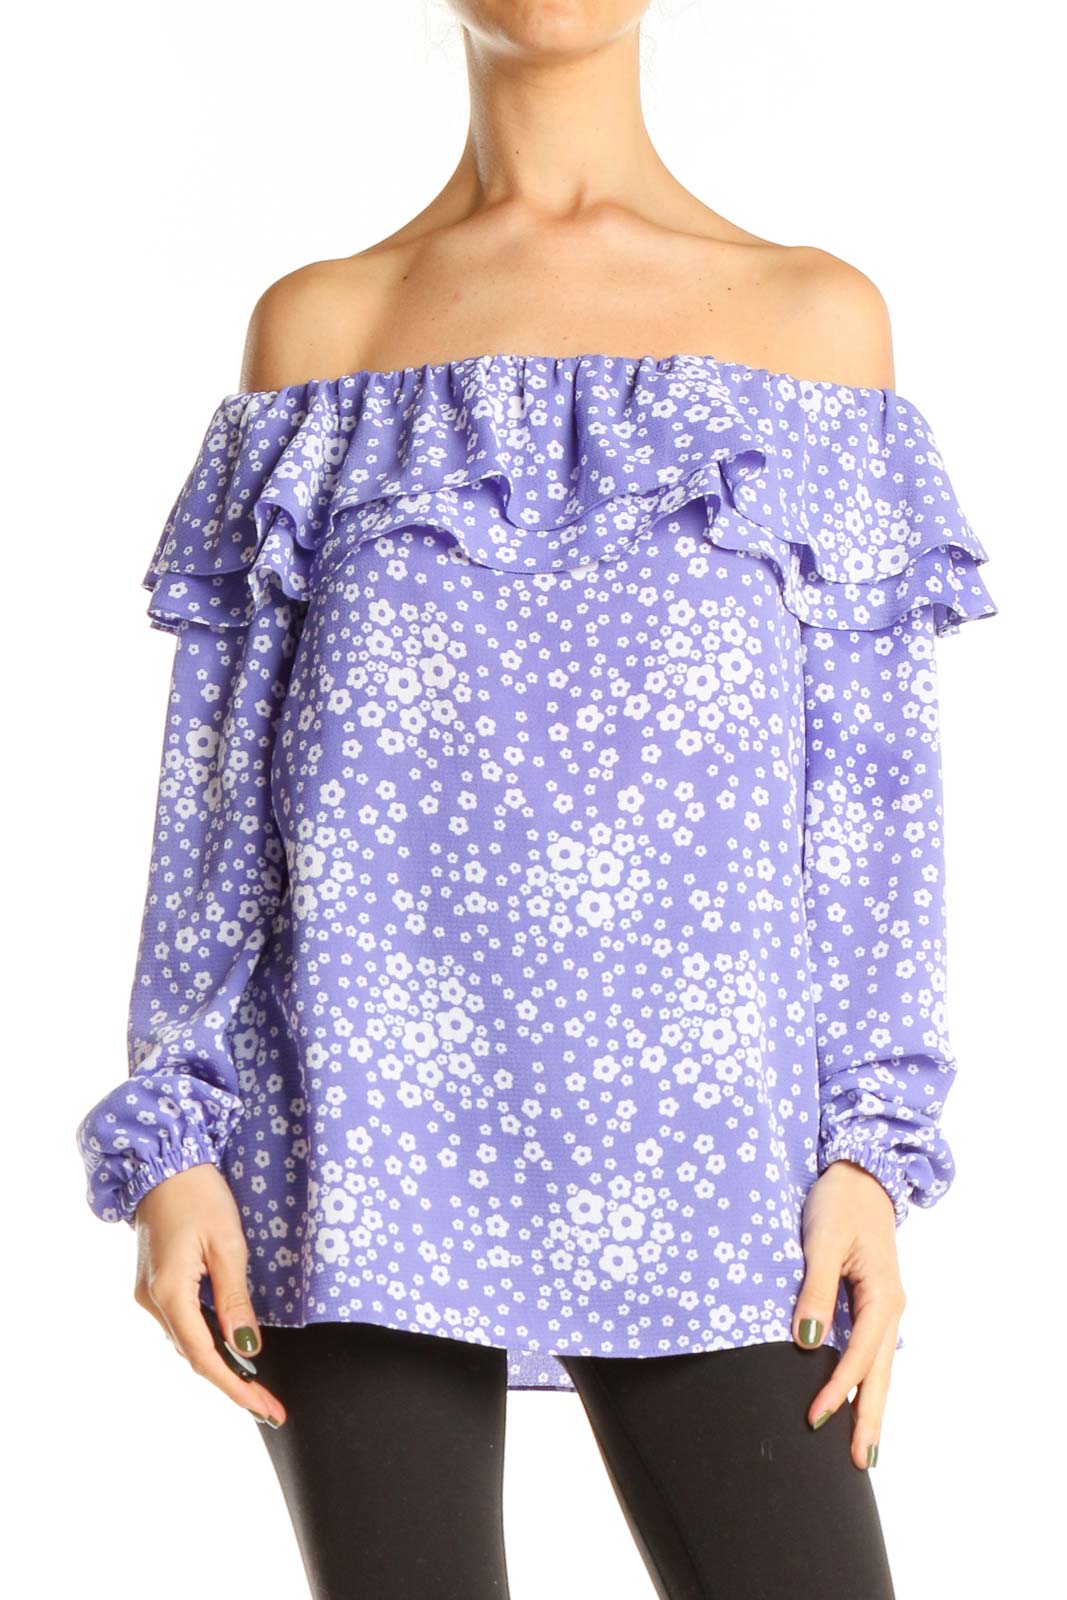 Purple Floral Print Off The Shoulder Chic Top Front